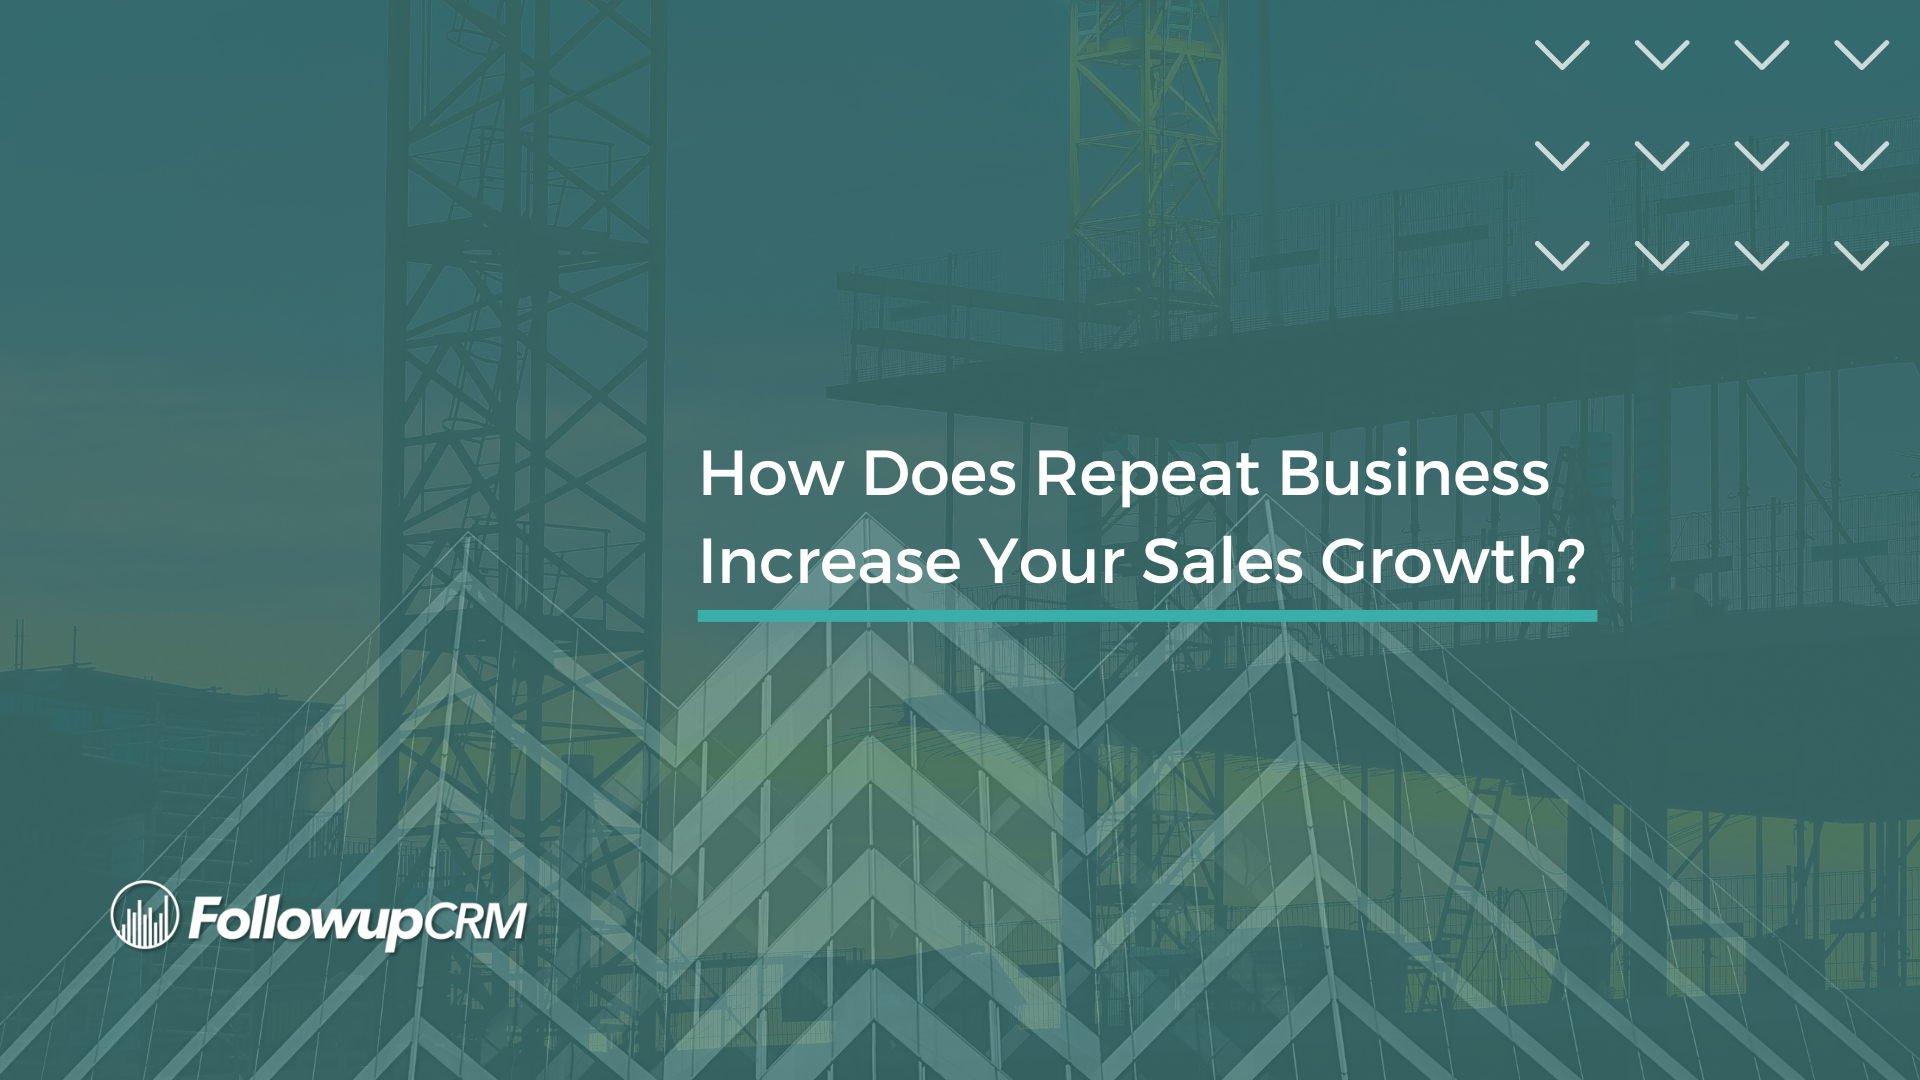 How Does Repeat Business Increase Your Sales Growth?